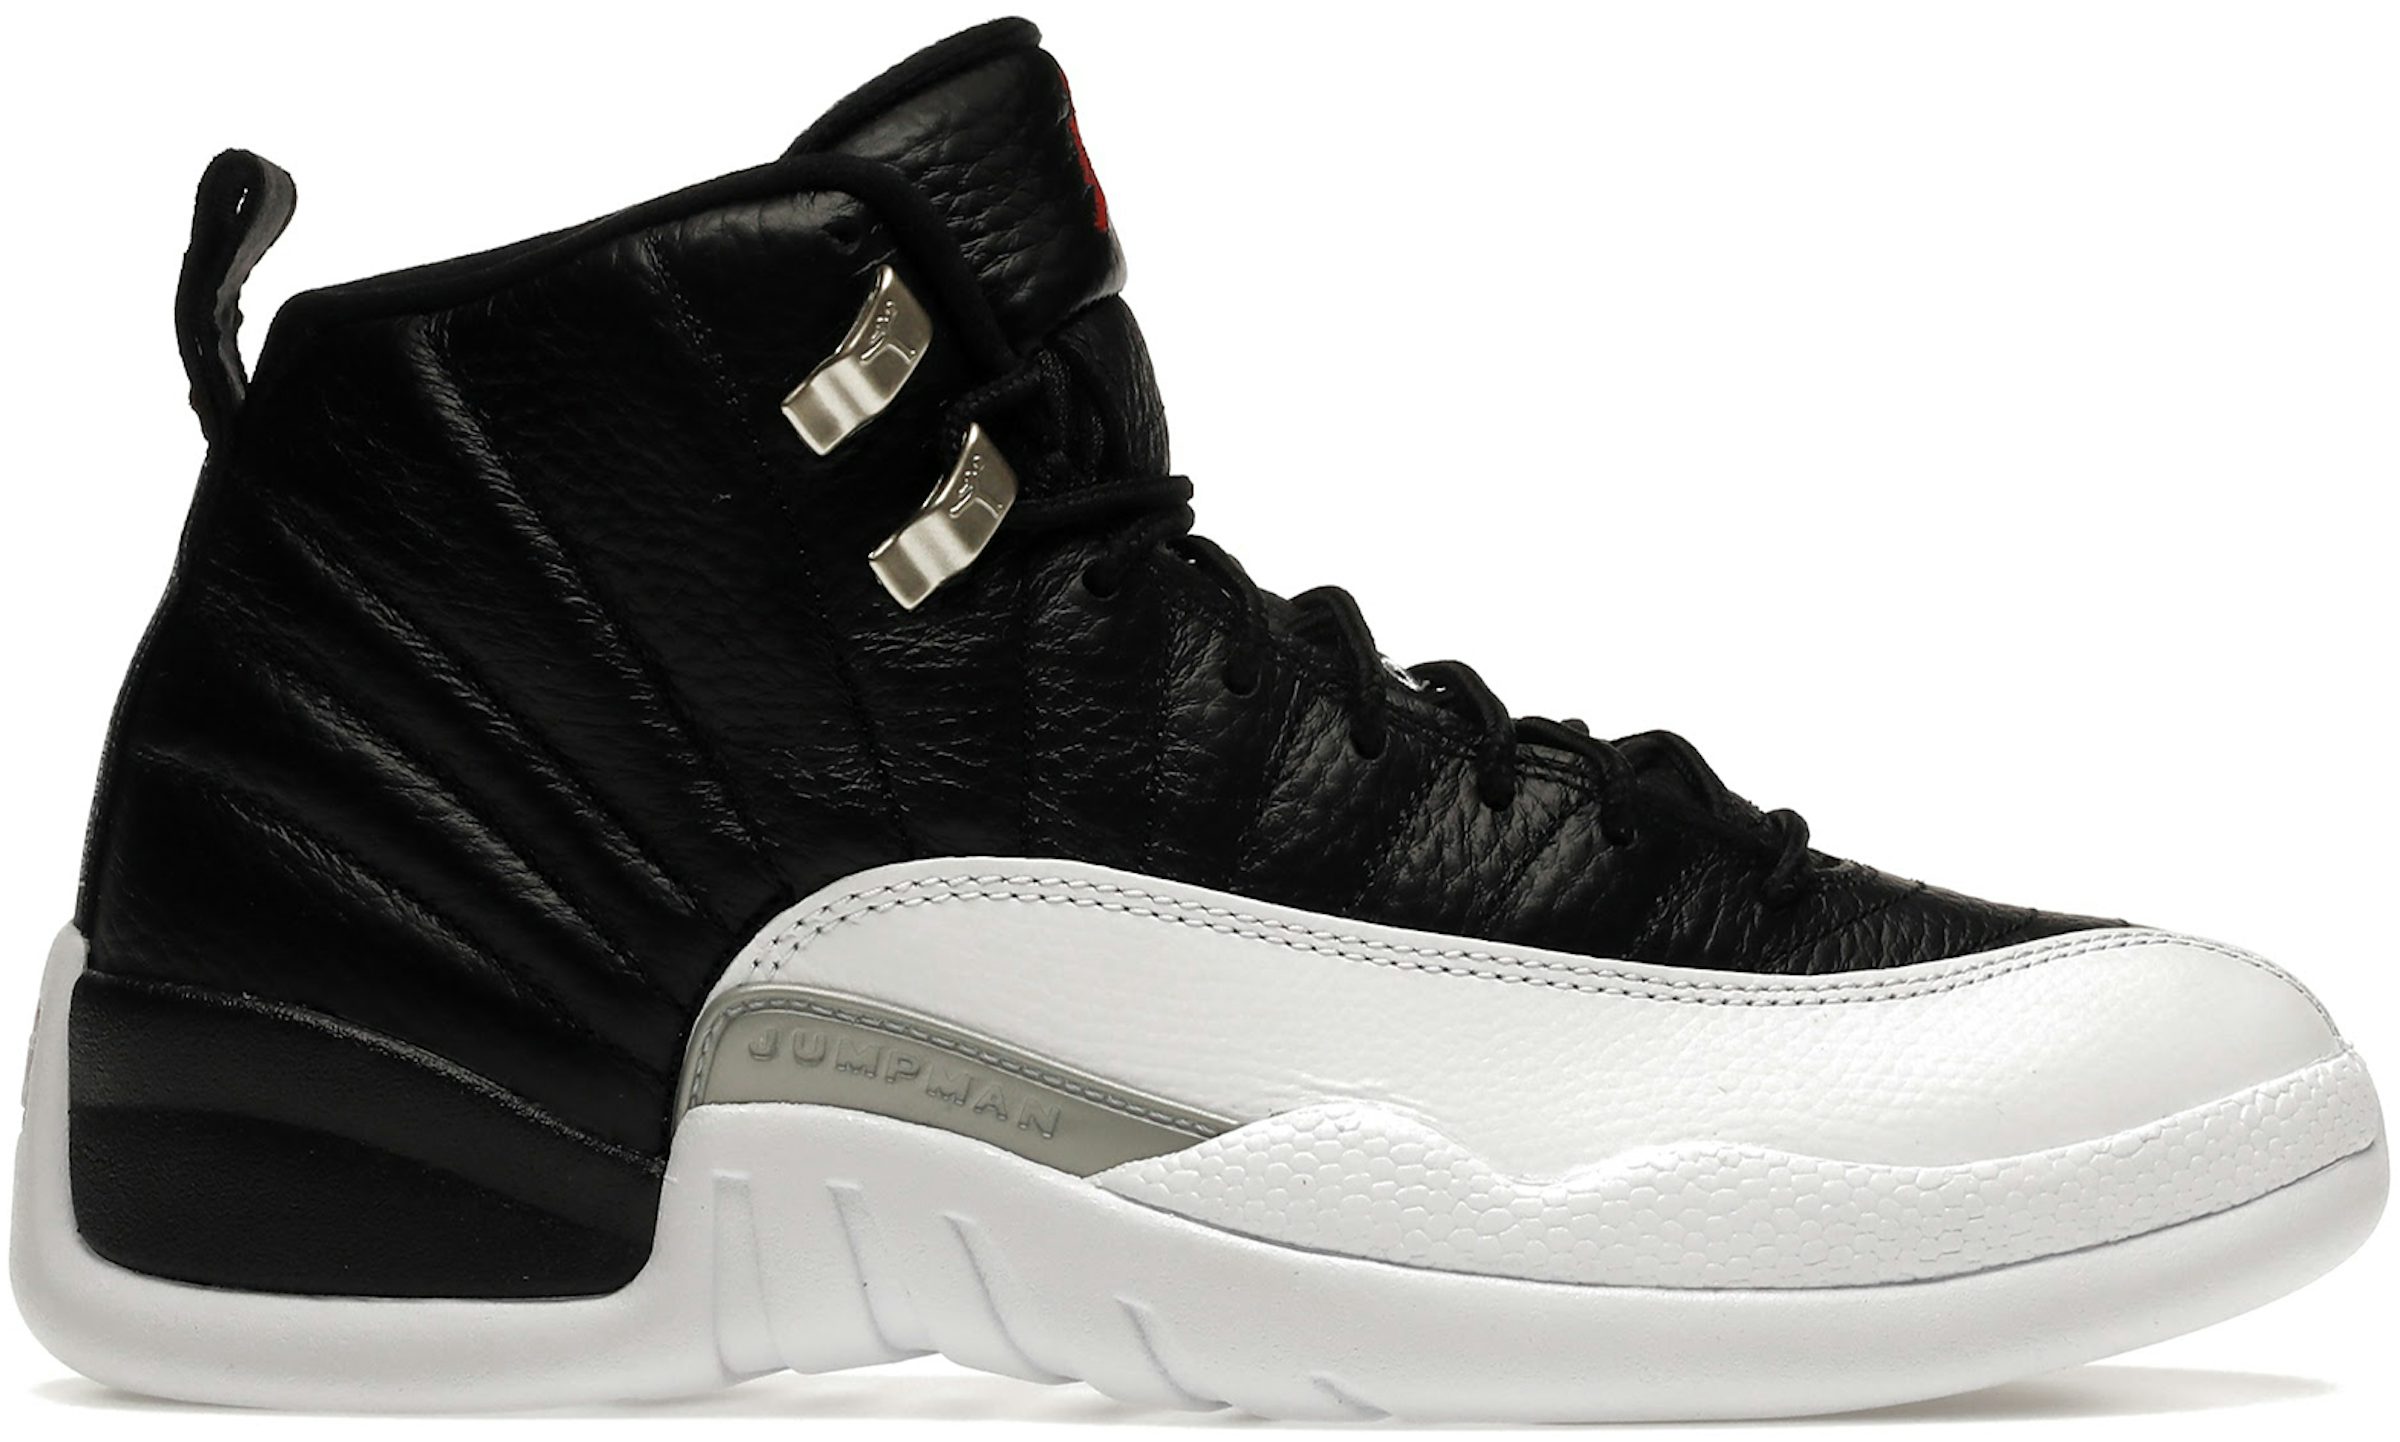 TEX 'Black' - Nike Undercover x white air jordans with 23 on back